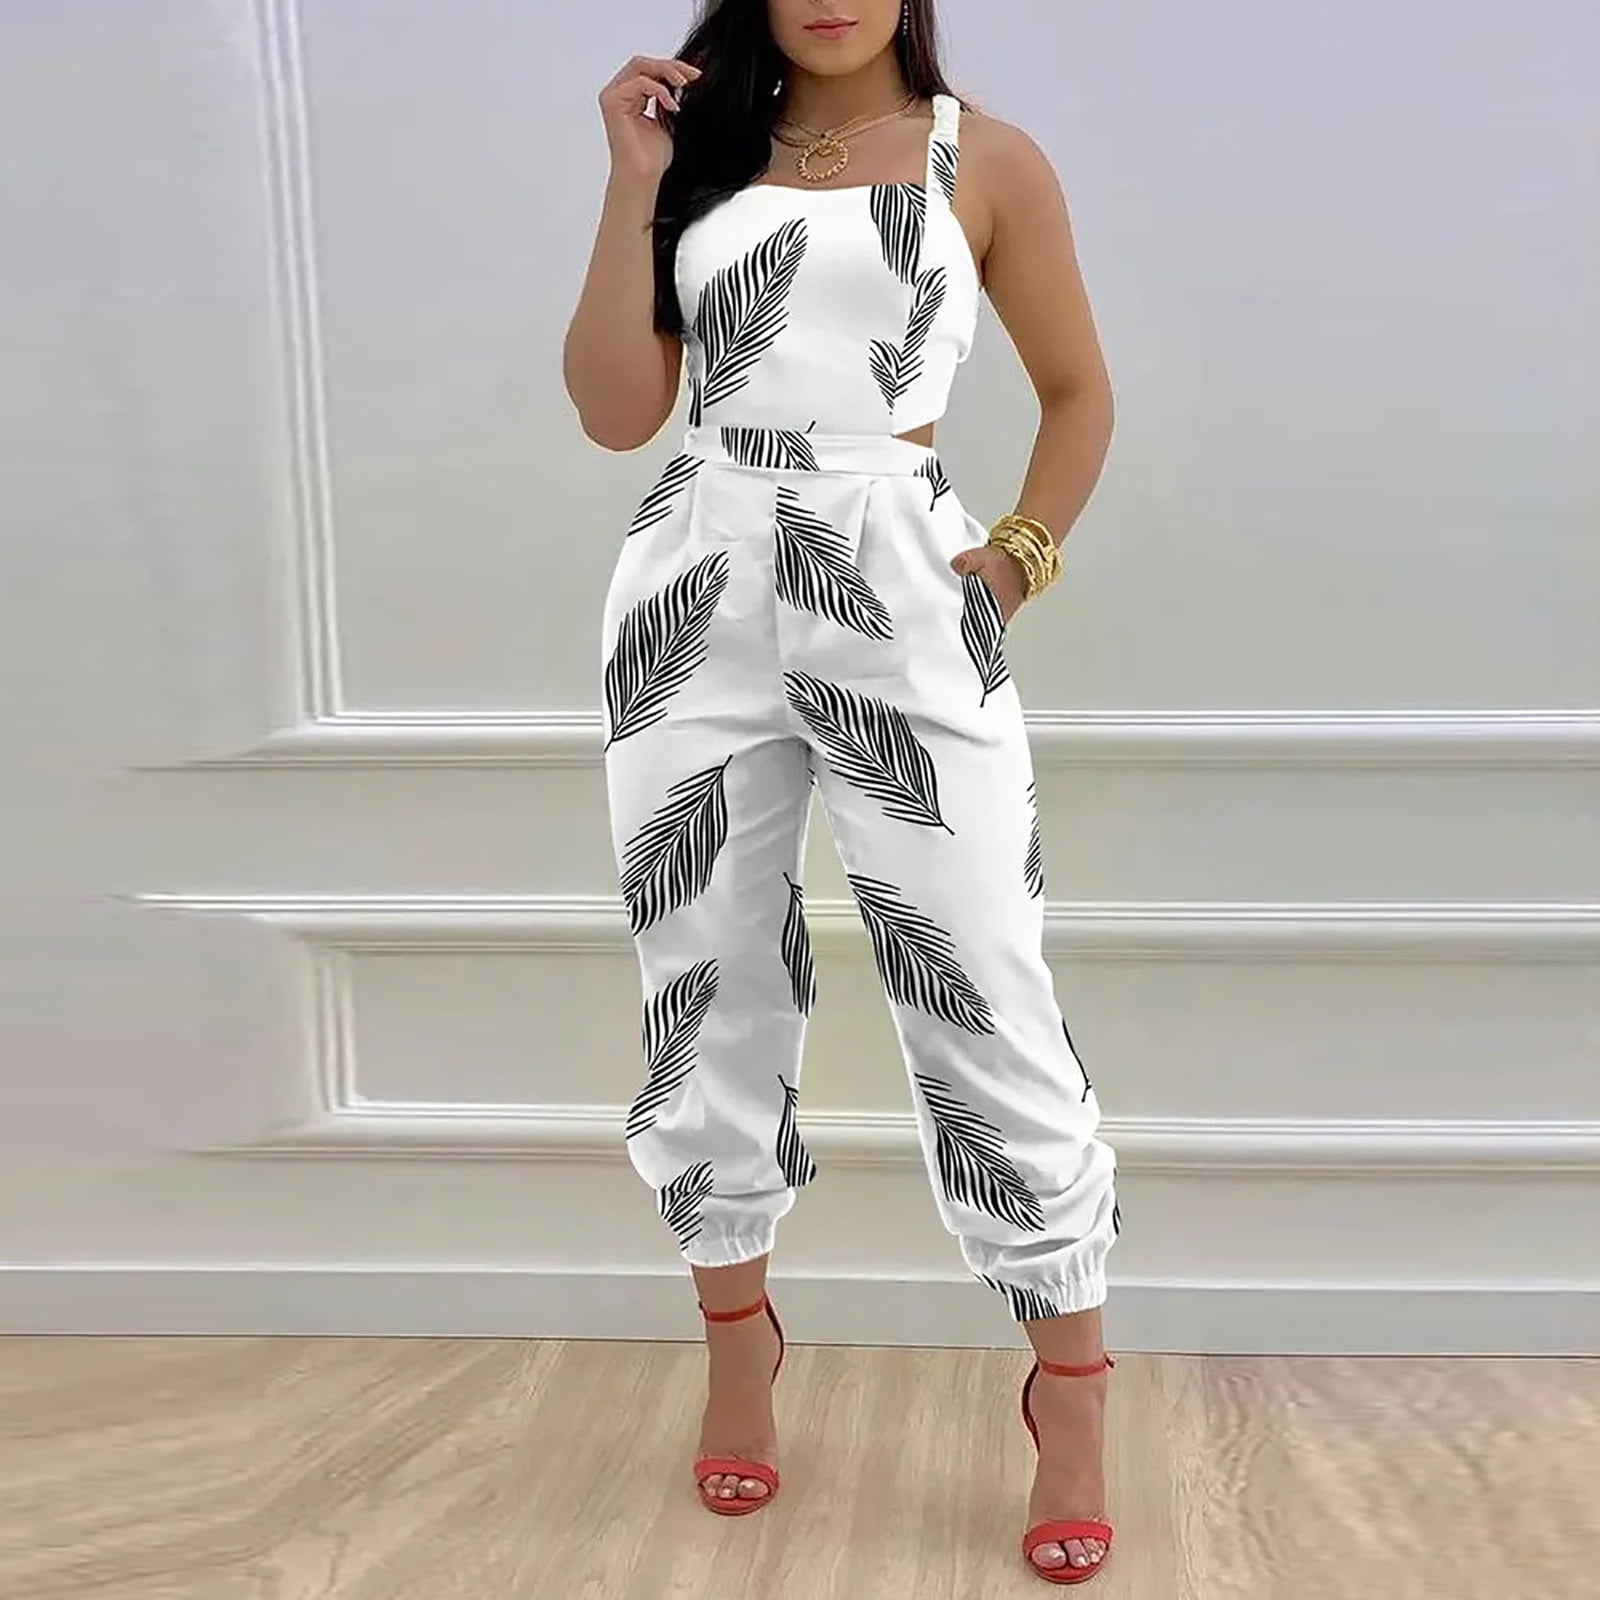 Aliya Fashion Solid color jumpsuit Round neck jumpsuit Women's jumpsuits  Fashion jumpsuits Sleeveless jumpsuits Summer jumpsuits